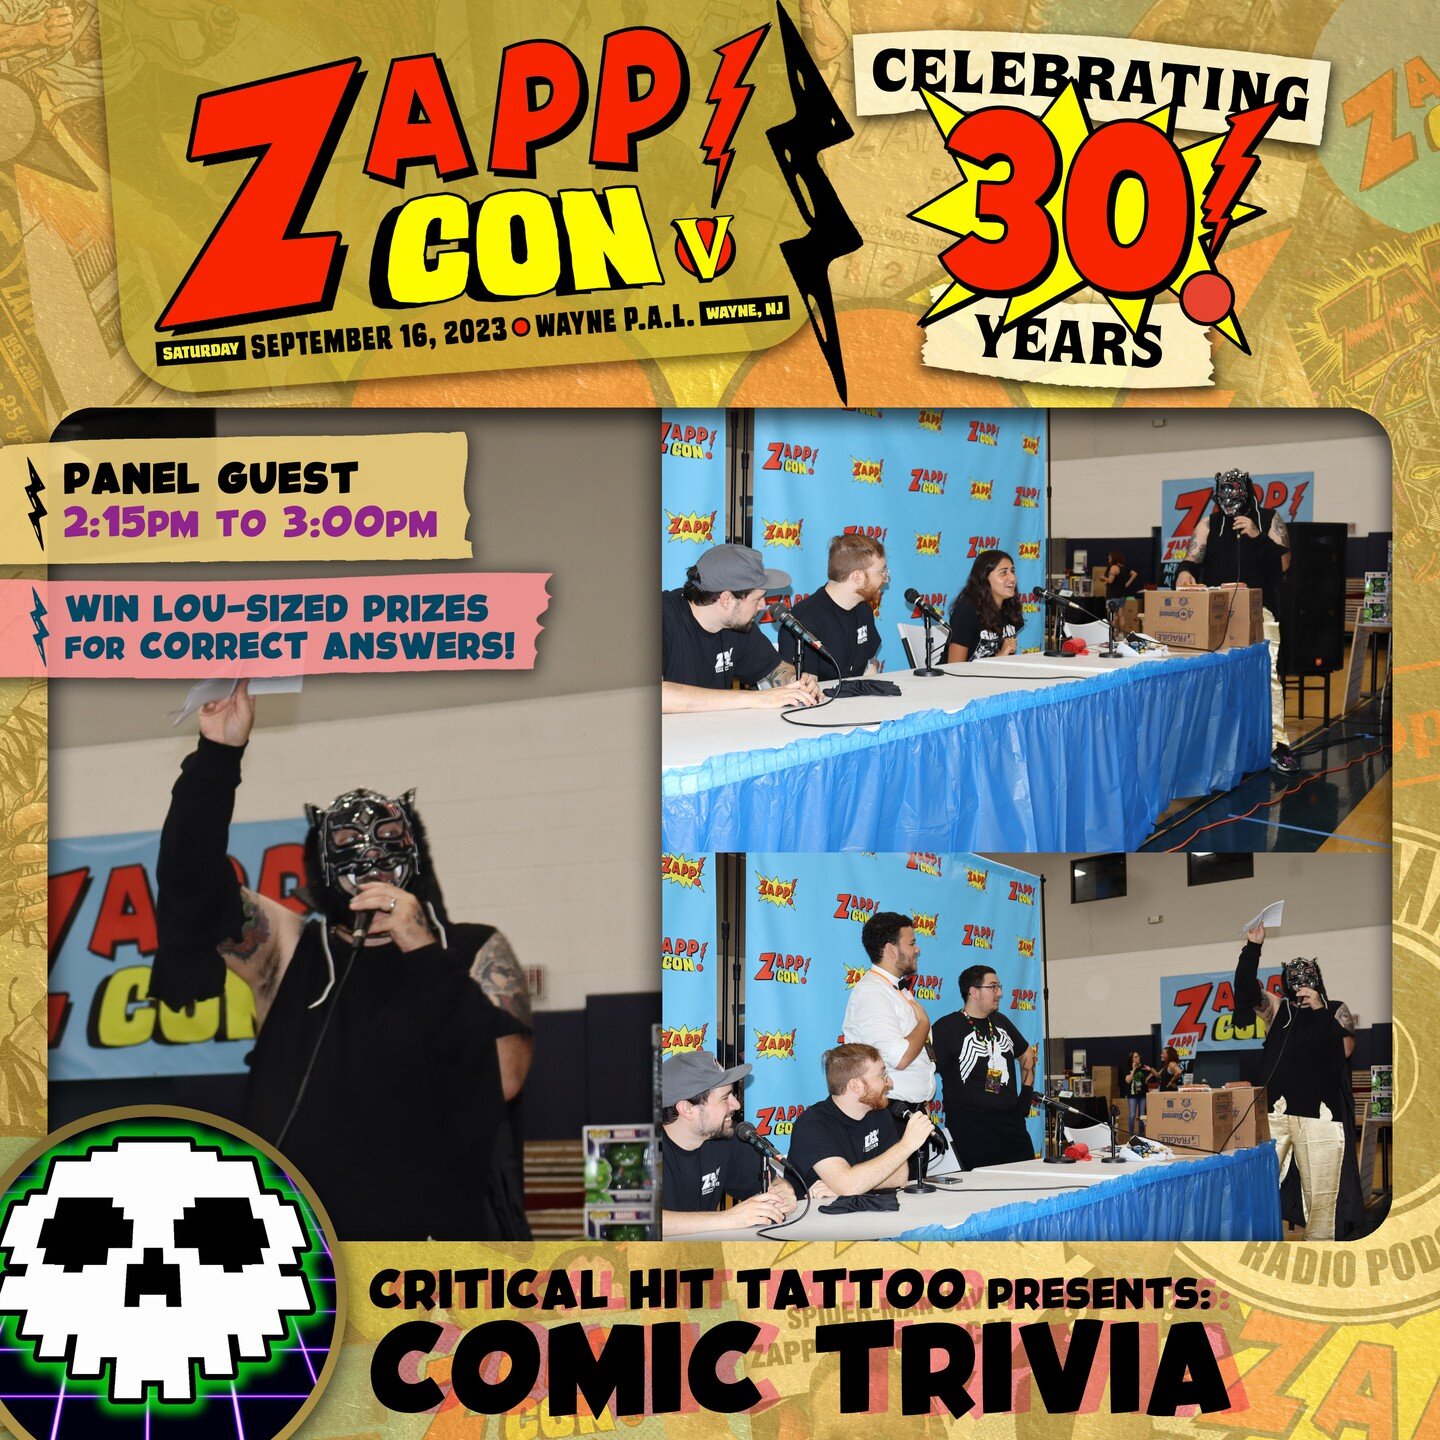 Win Lou-Sized prizes at the fifth installment of CRITICAL HIT TATTOO PRESENTS... at Zapp Con 5!
@lou_criticalhit 

#zappcomics #zappcon #zappcon5 #zappconnj #njcomiccon #njevents #artistalley #comicbooks #comicart #metal #panels #cosplay #wallbooks #